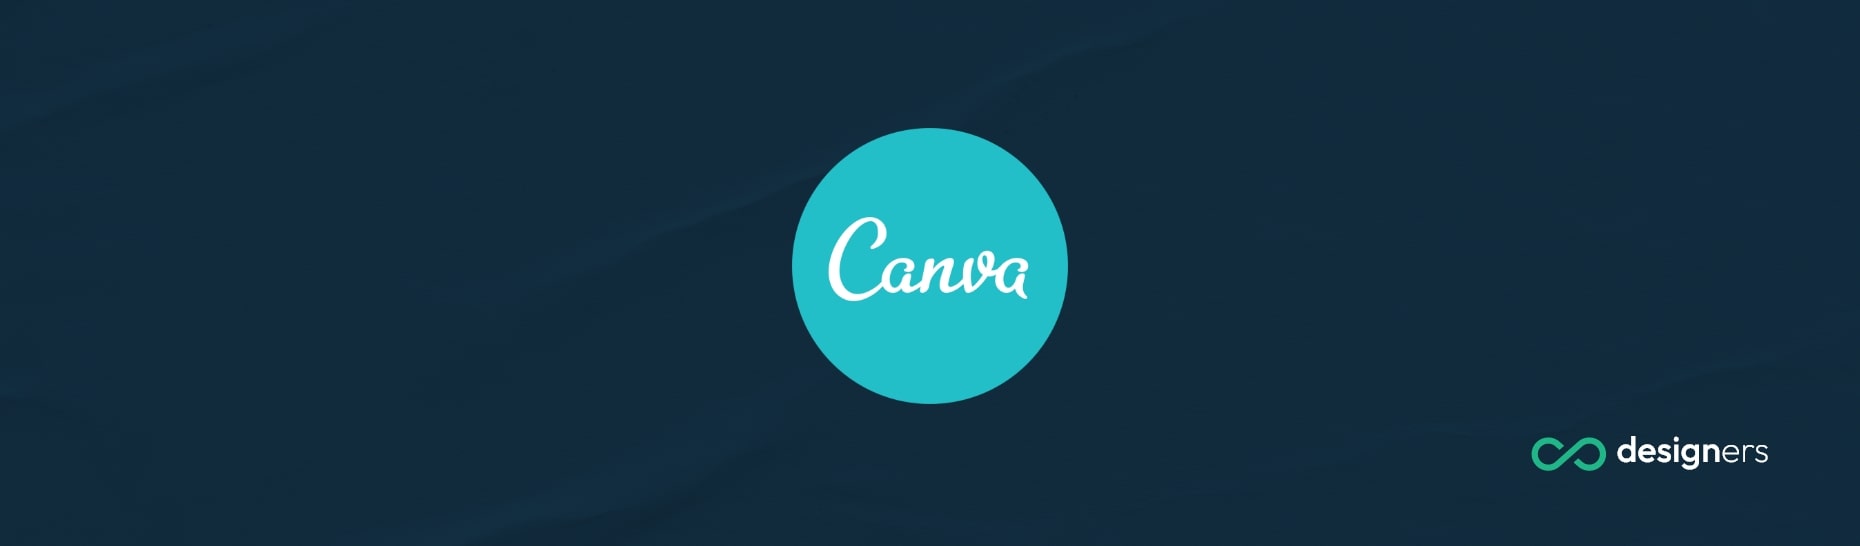 How Do I Change the Color of My Logo in Canva?